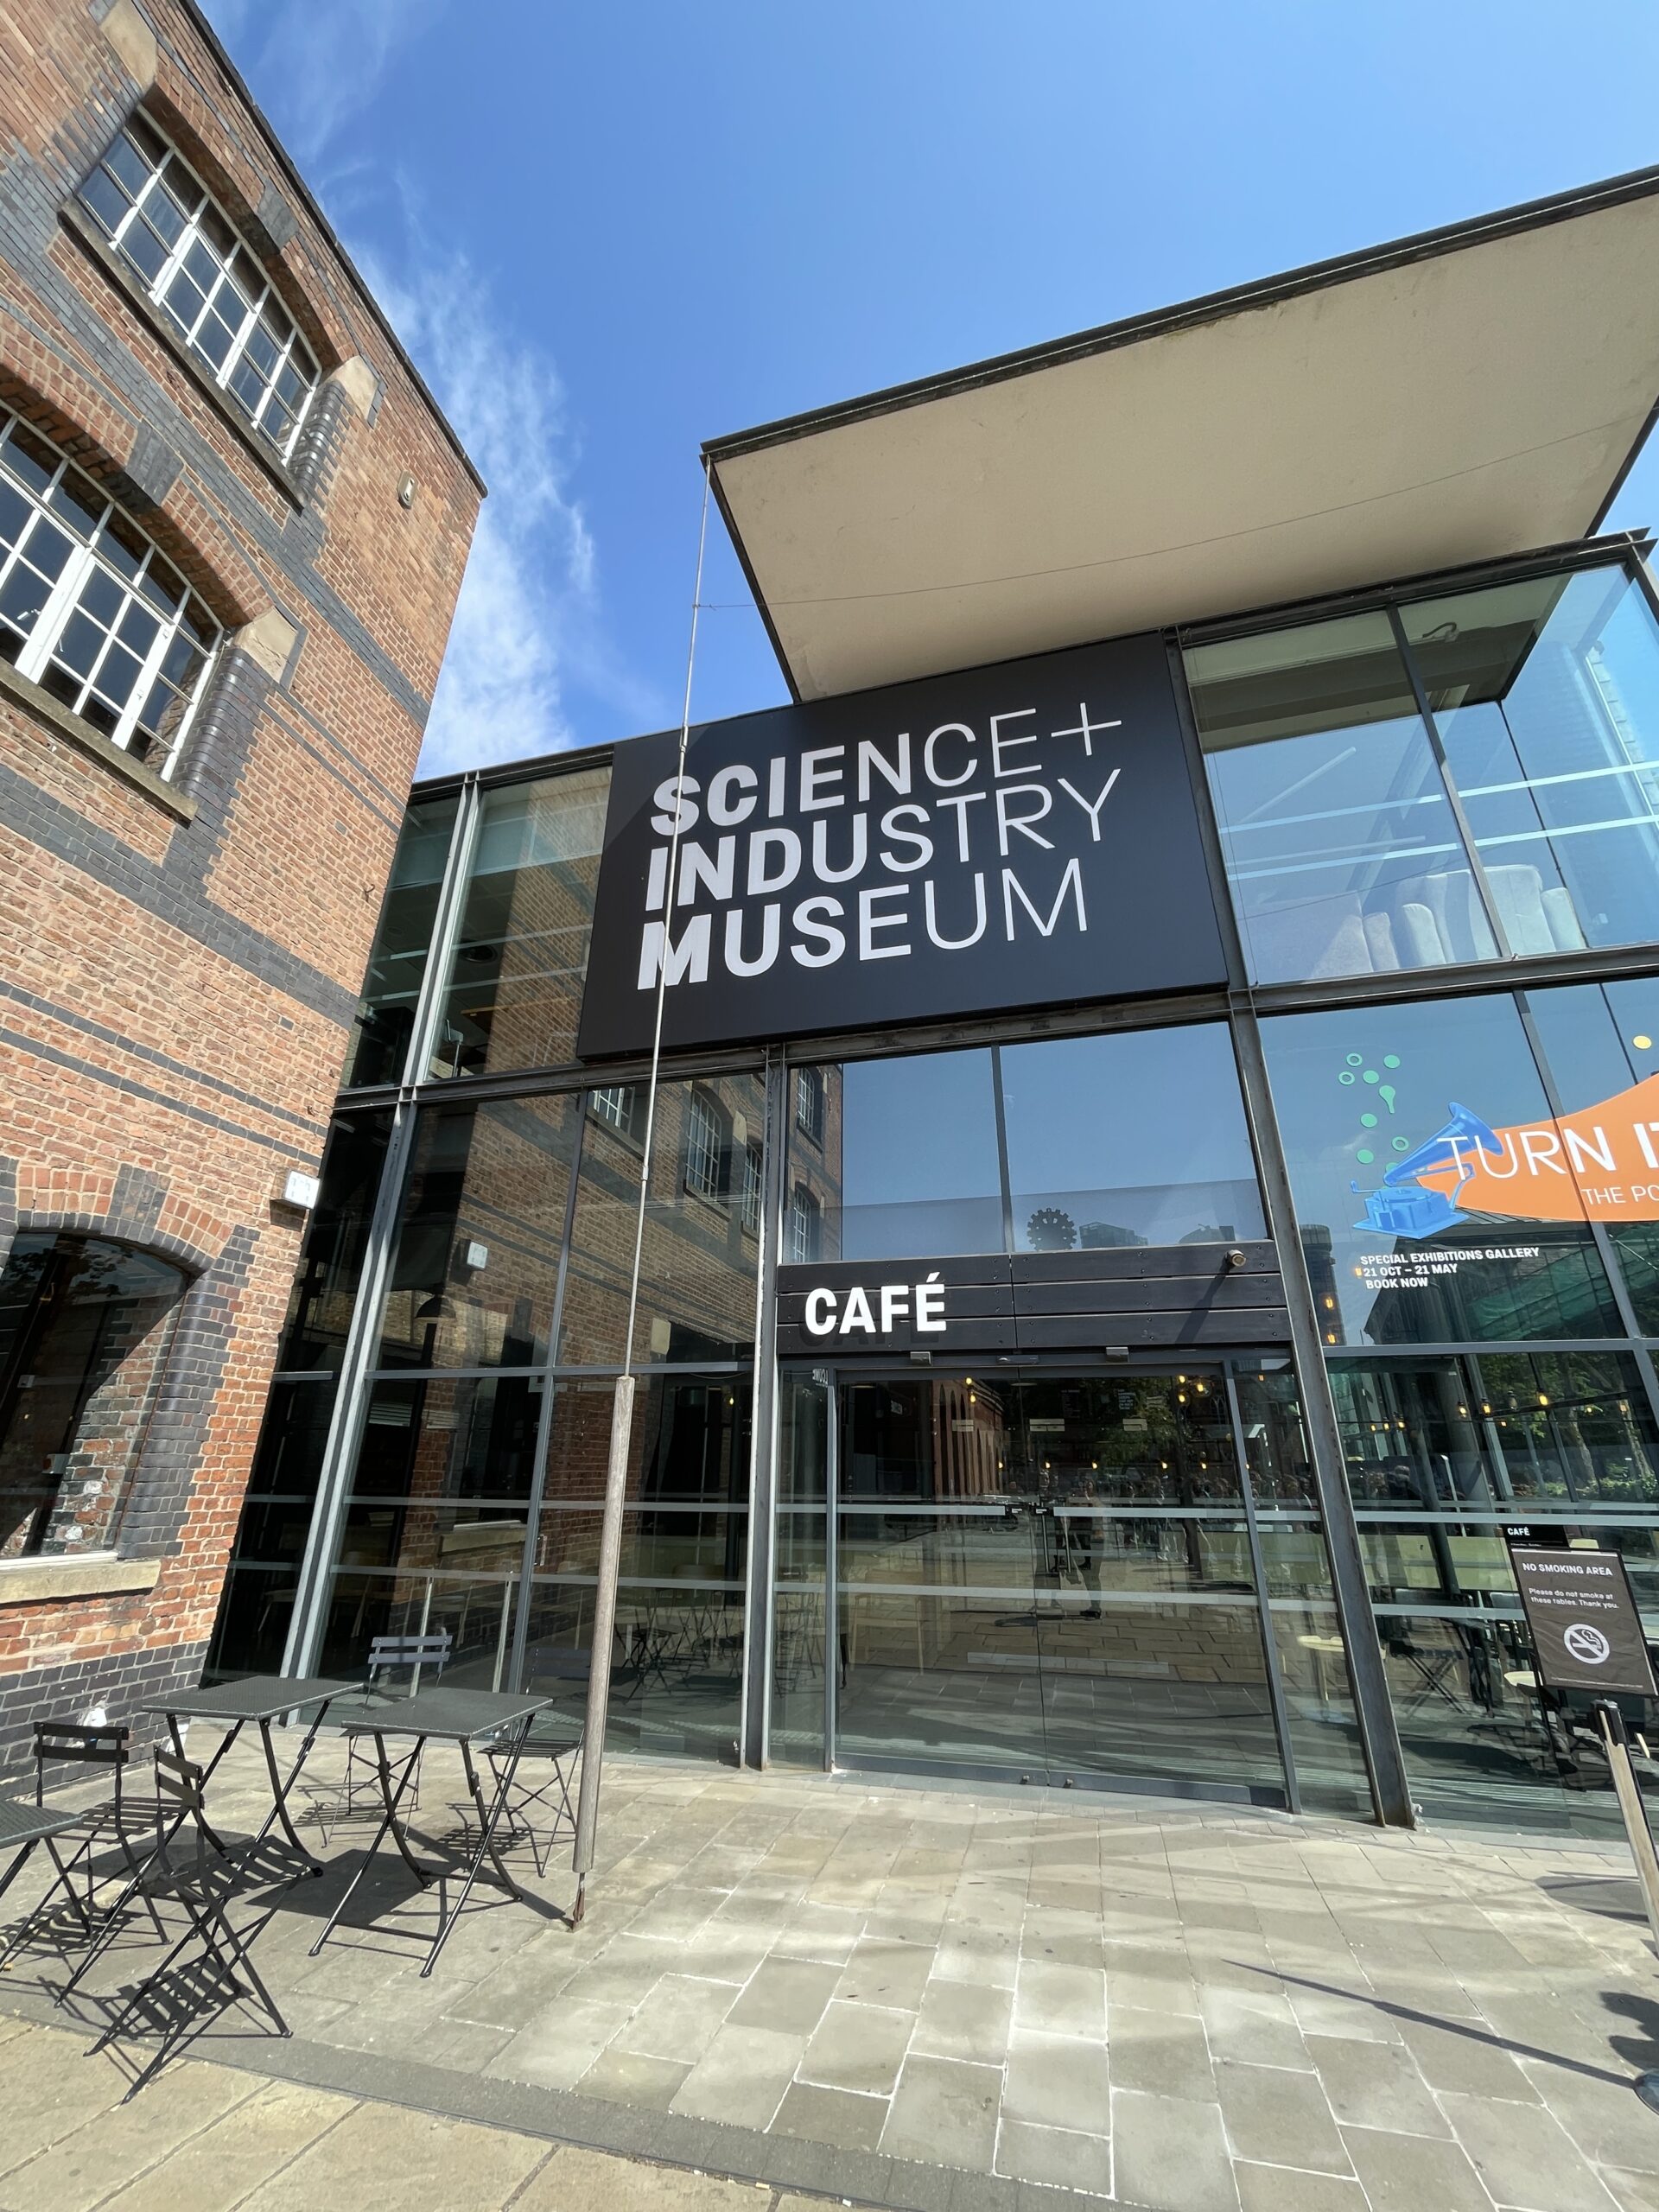 The Science and Industry Museum makes a great day out in Manchester